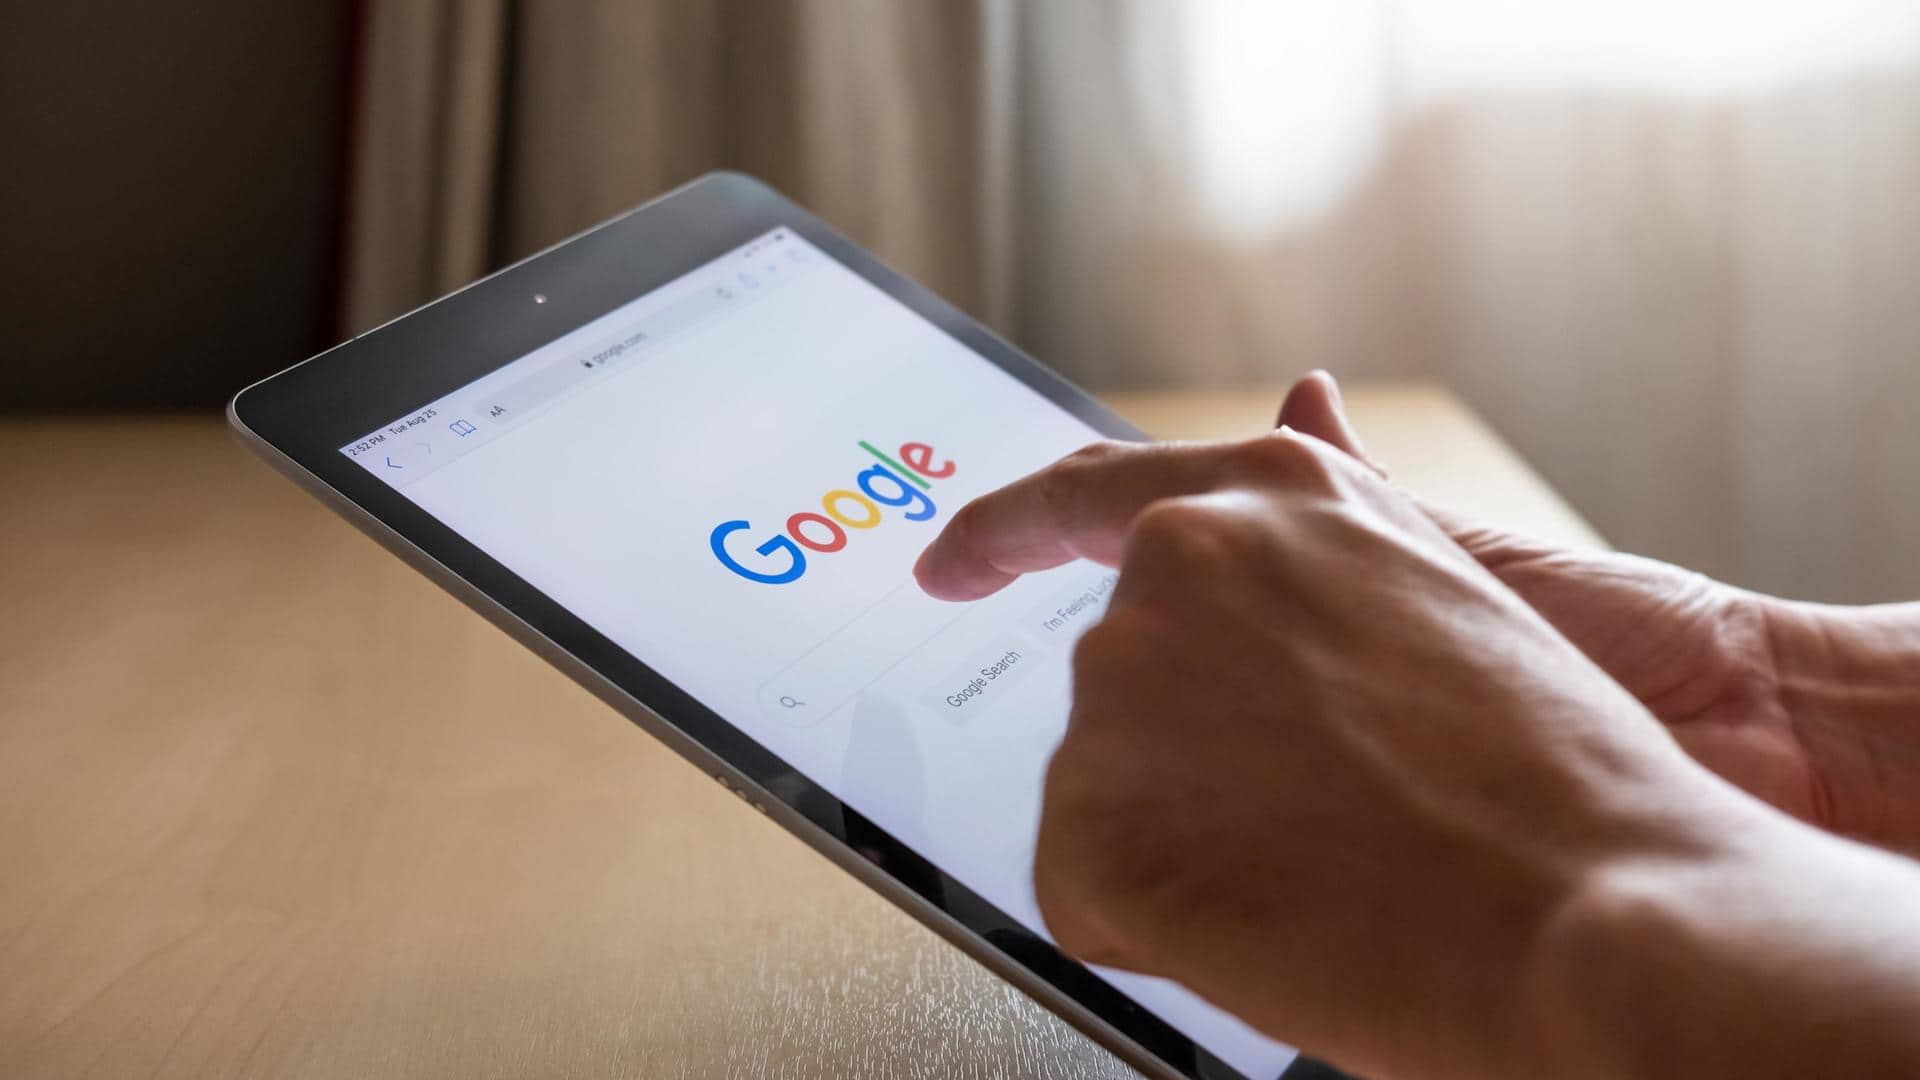 These tricks can drastically improve your Google search experience